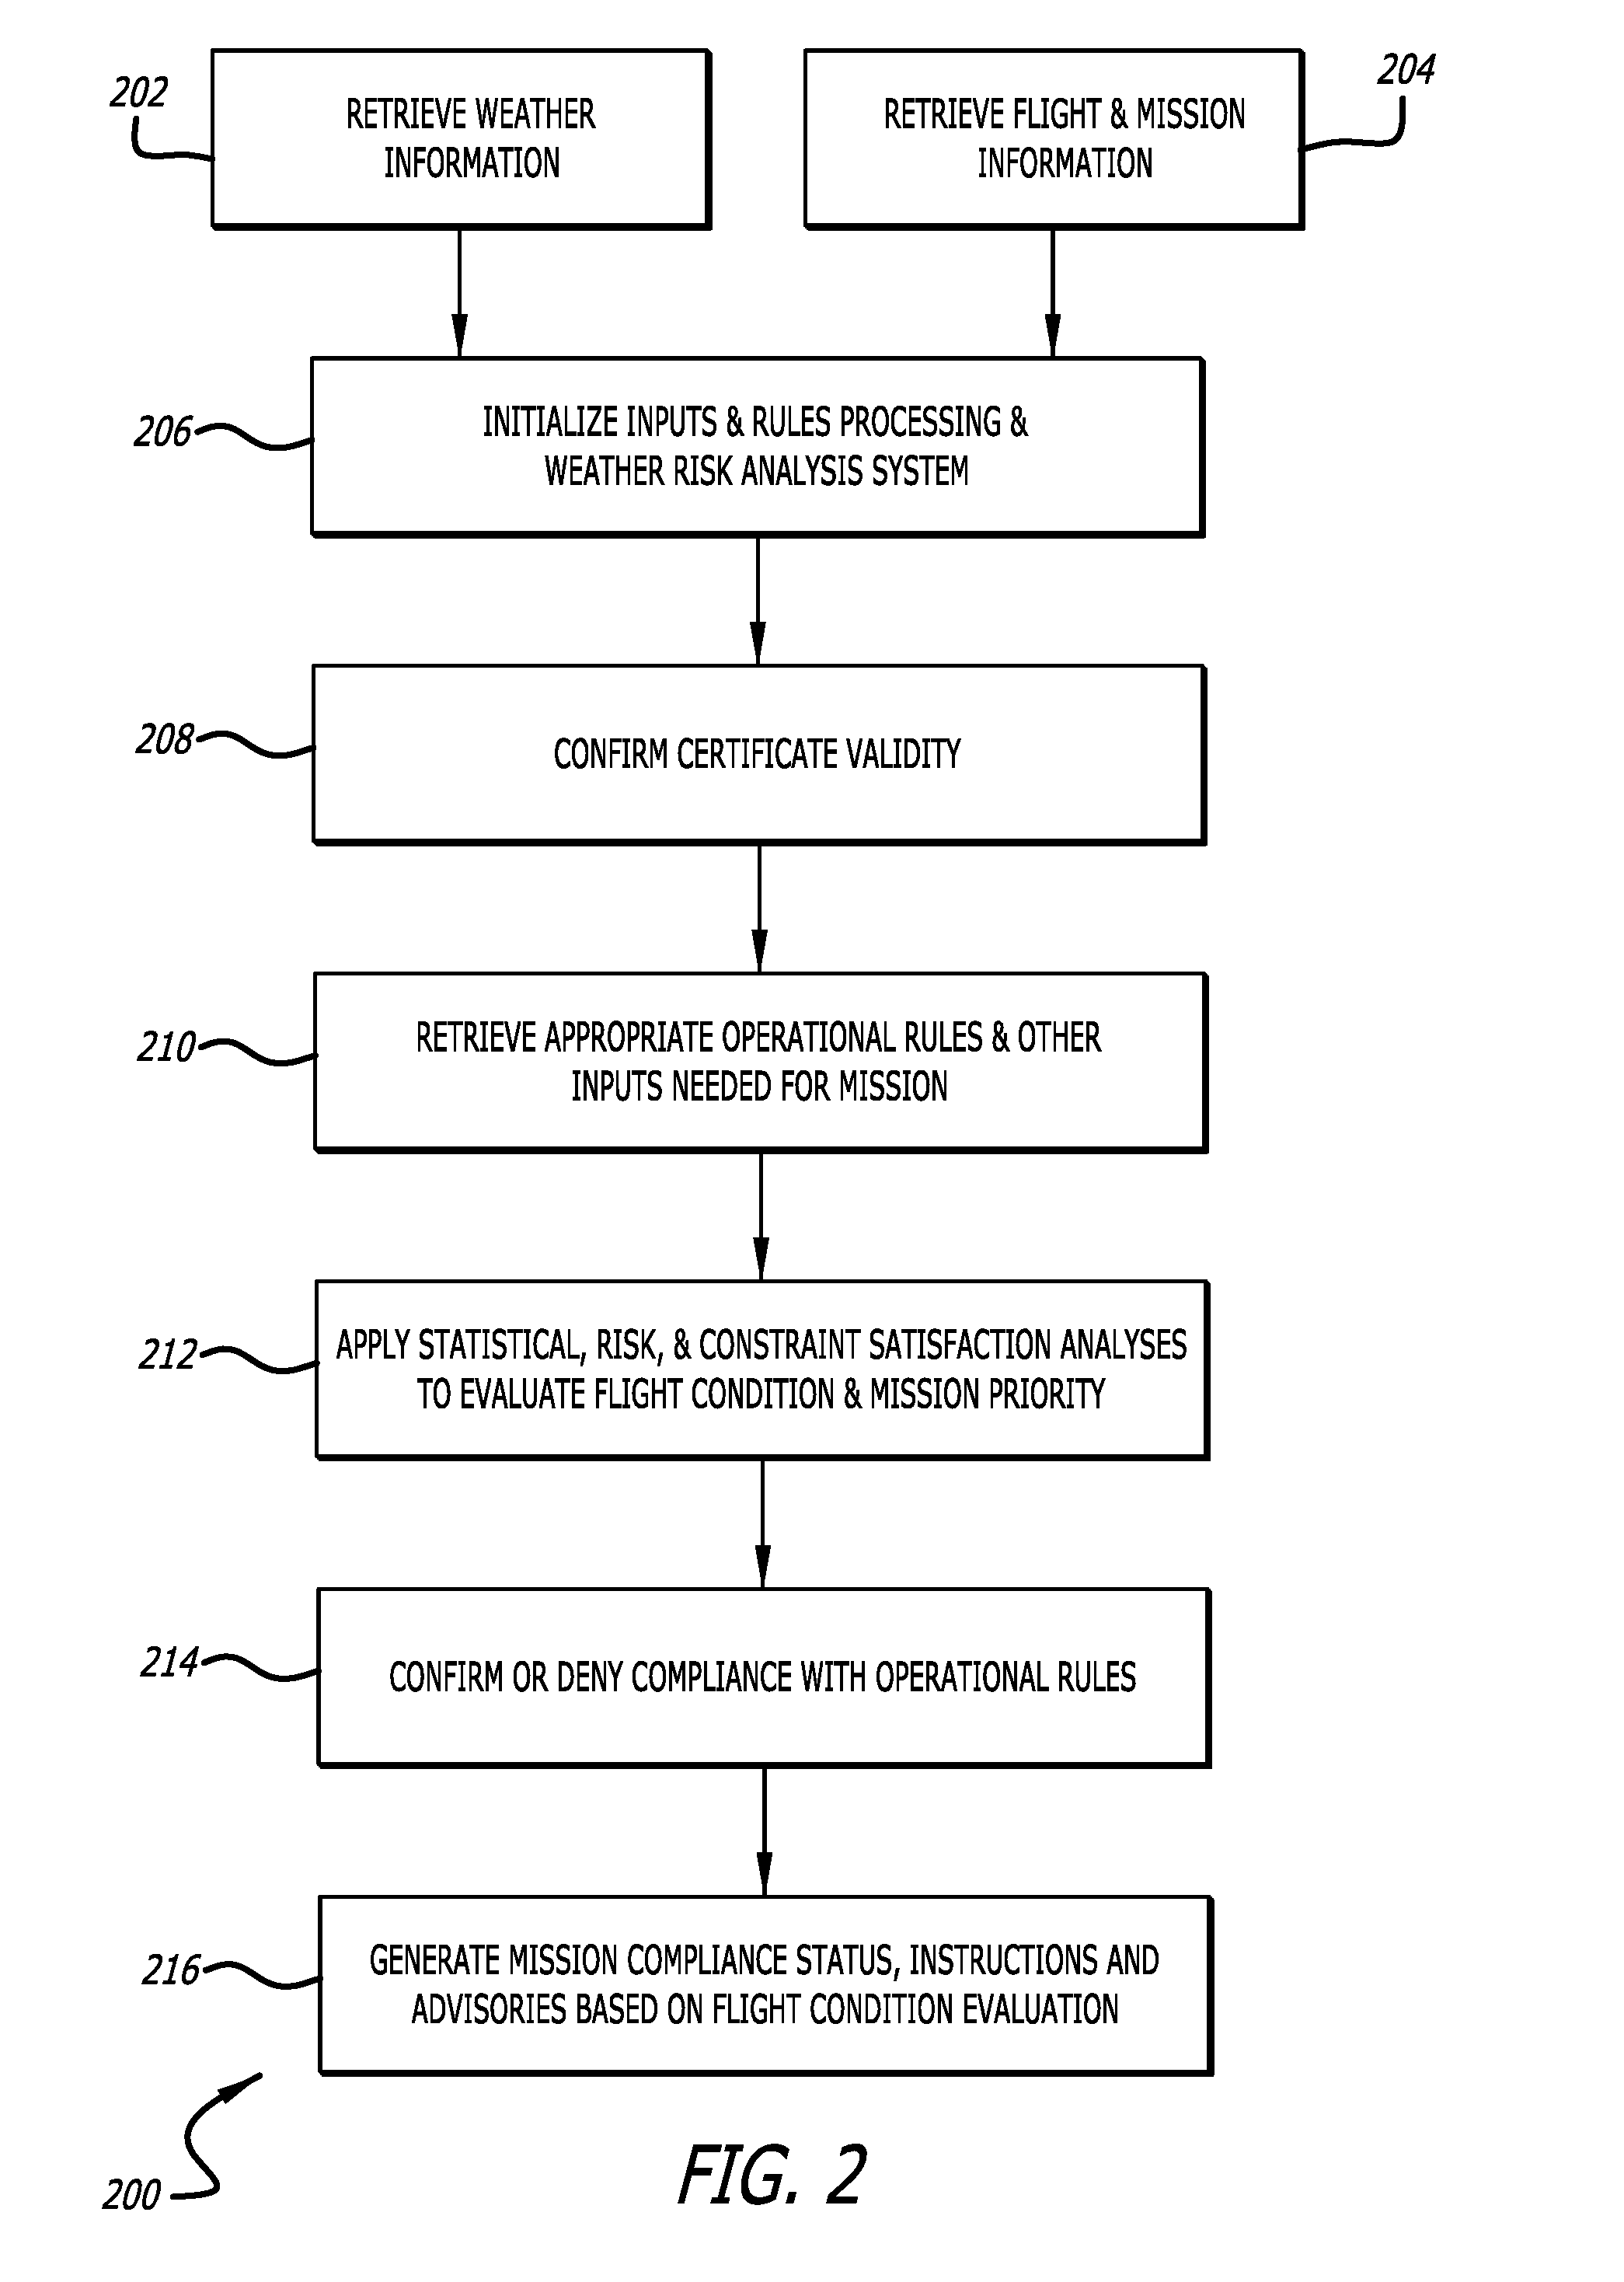 Mission prioritization and work order arrangement for unmanned aerial vehicles and remotely-piloted vehicles